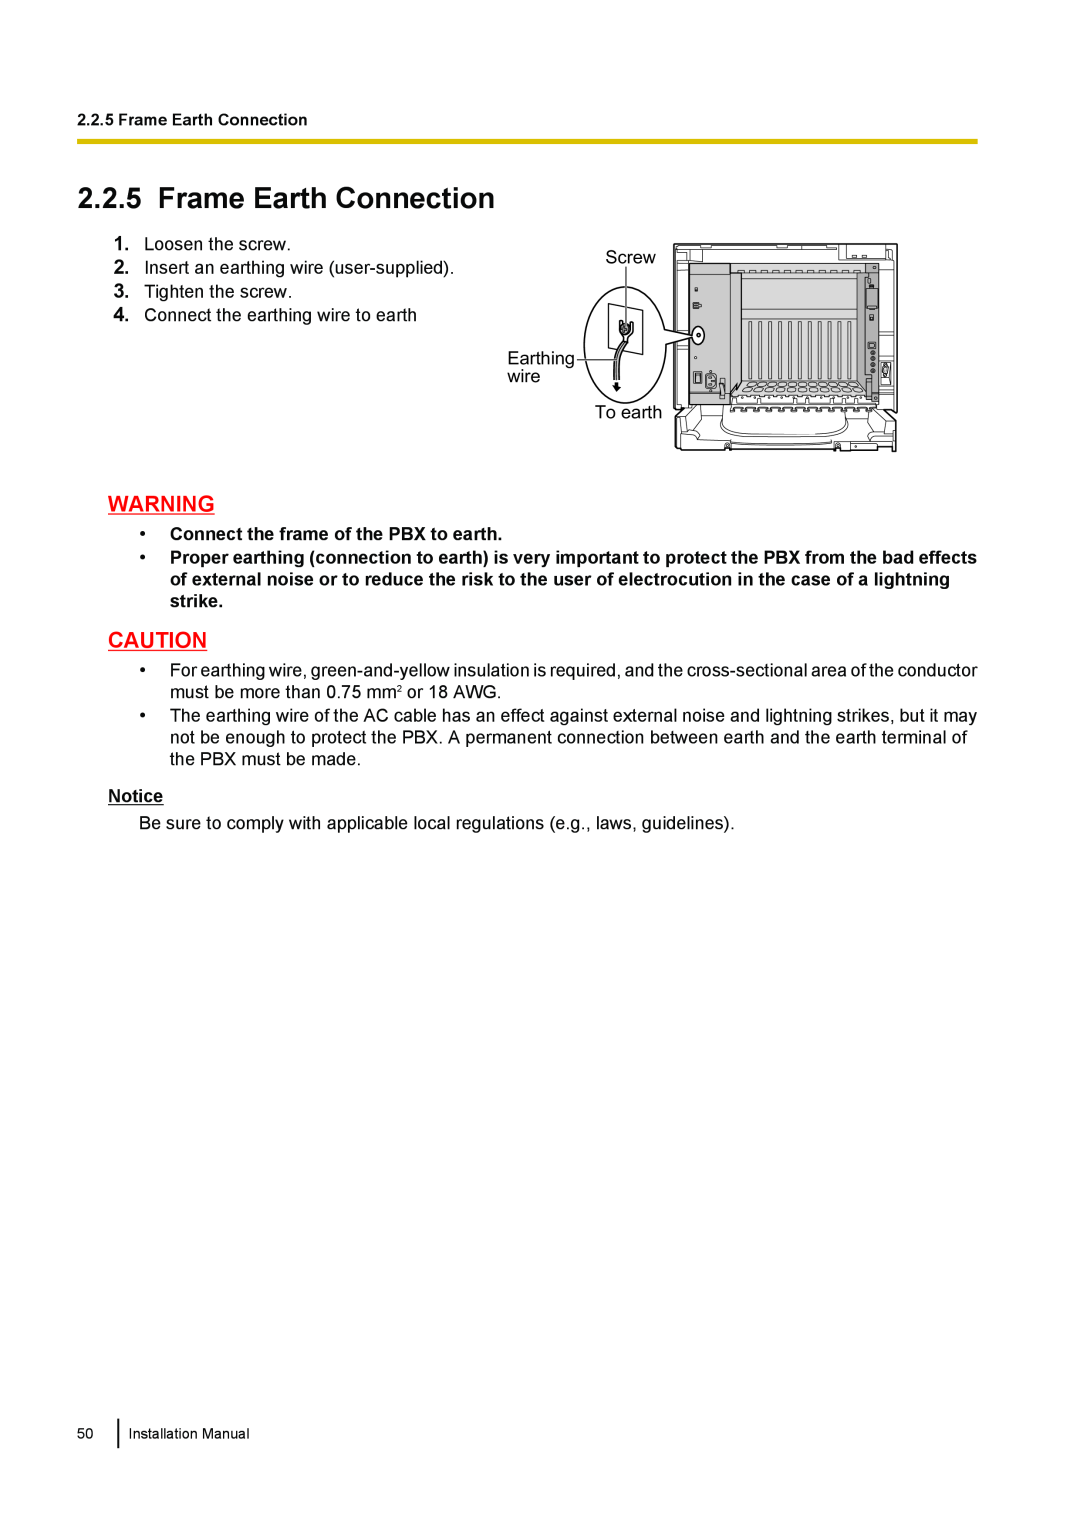 Panasonic KX-TDA100 installation manual Frame Earth Connection, Connect the frame of the PBX to earth 